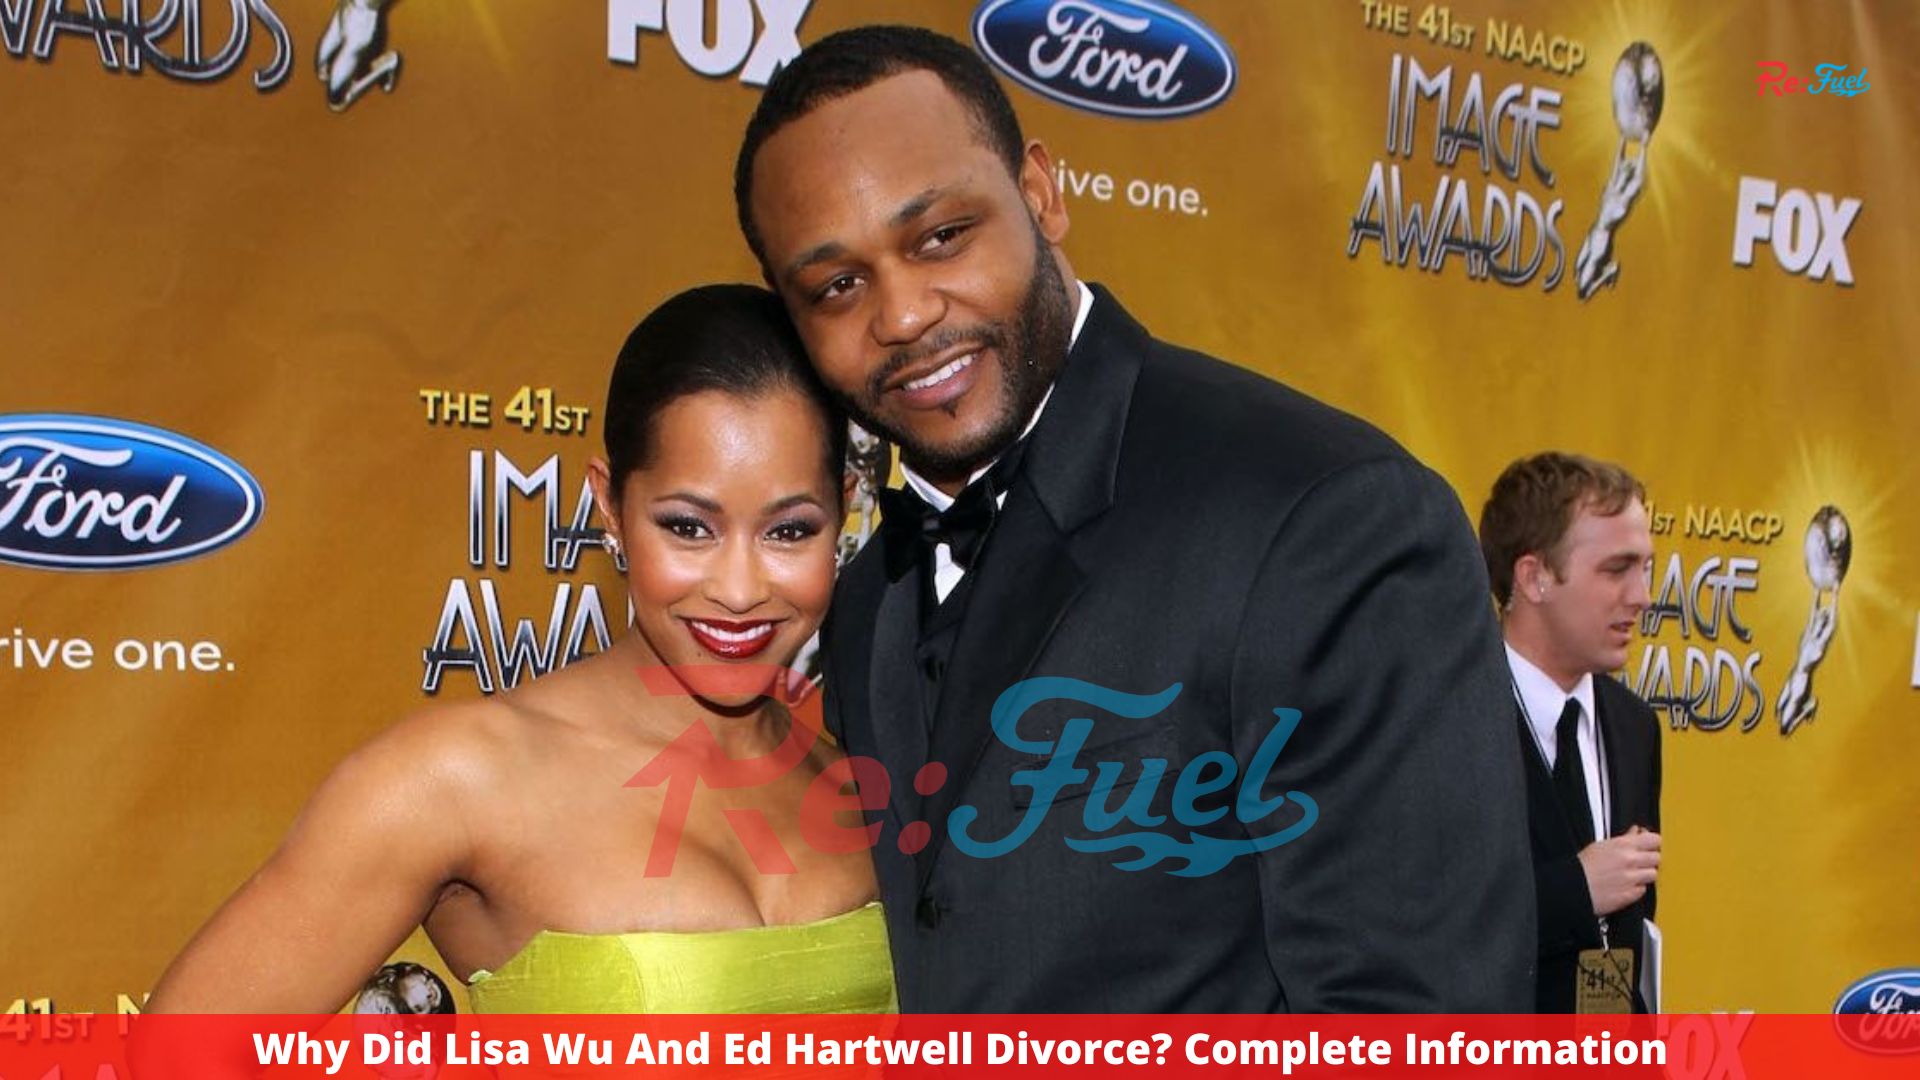 Why Did Lisa Wu And Ed Hartwell Divorce? Complete Information